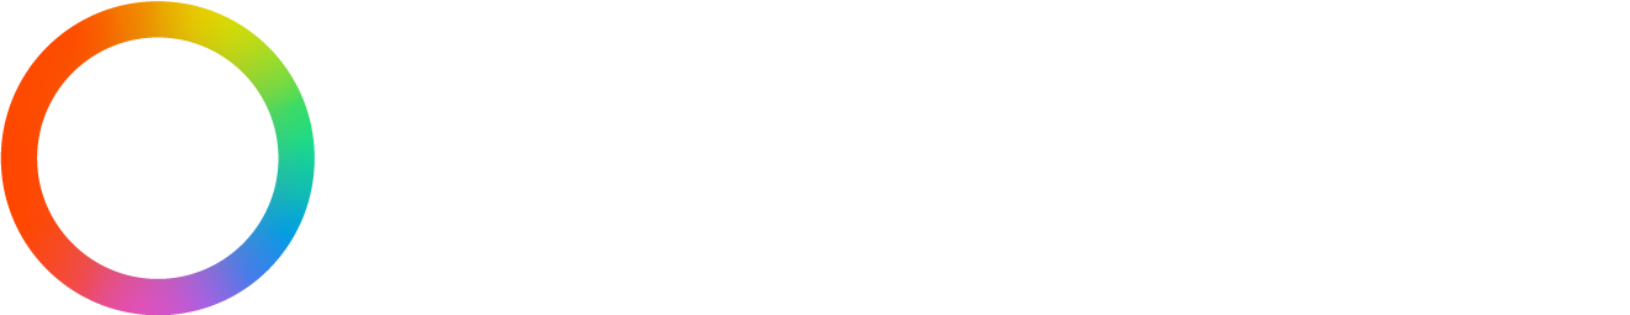 Payoneer logo large for dark backgrounds (transparent PNG)